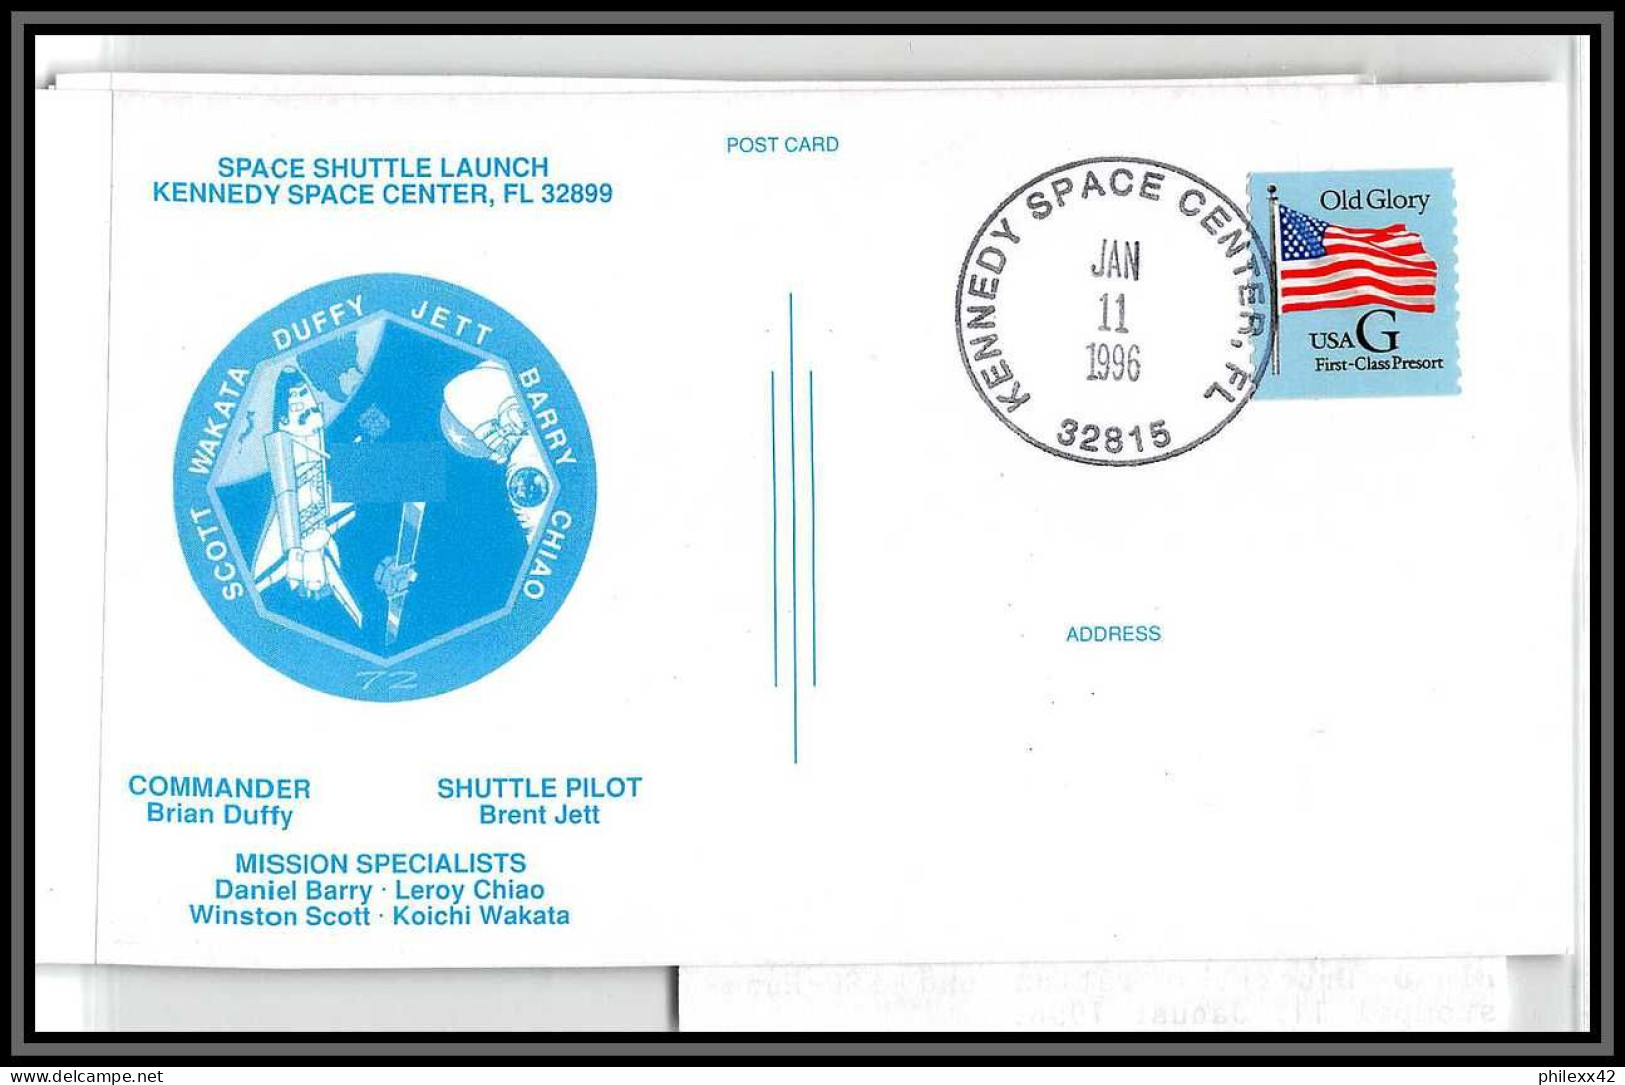 2155 Espace (space Raumfahrt) Lettre (cover) USA Sts-72 Start Endeavour Navette Shuttle 11/1/1996 + Stickers Autocollant - United States